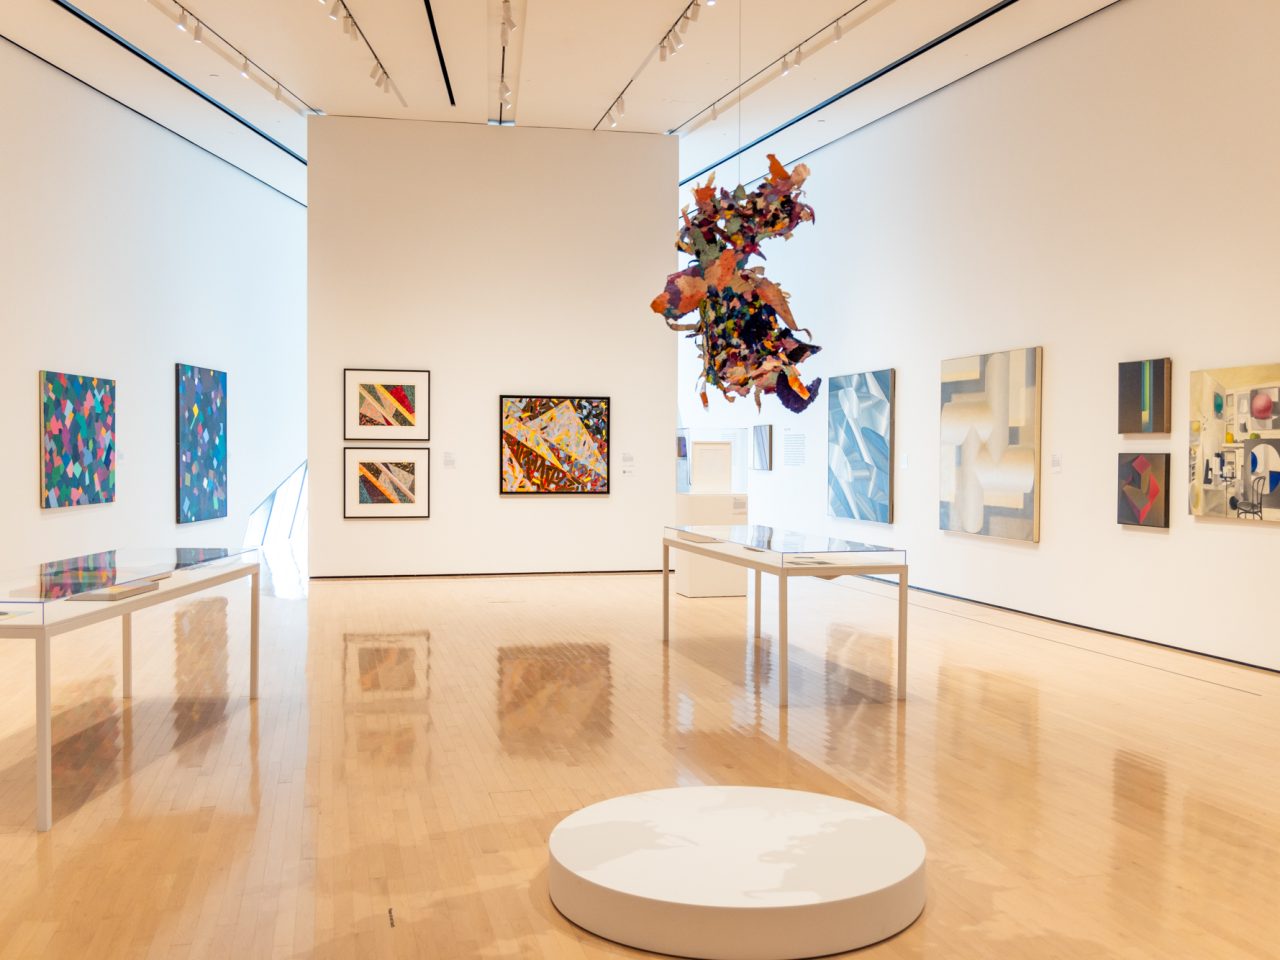 Gallery of abstract paintings on walls and paper structure hanging from above